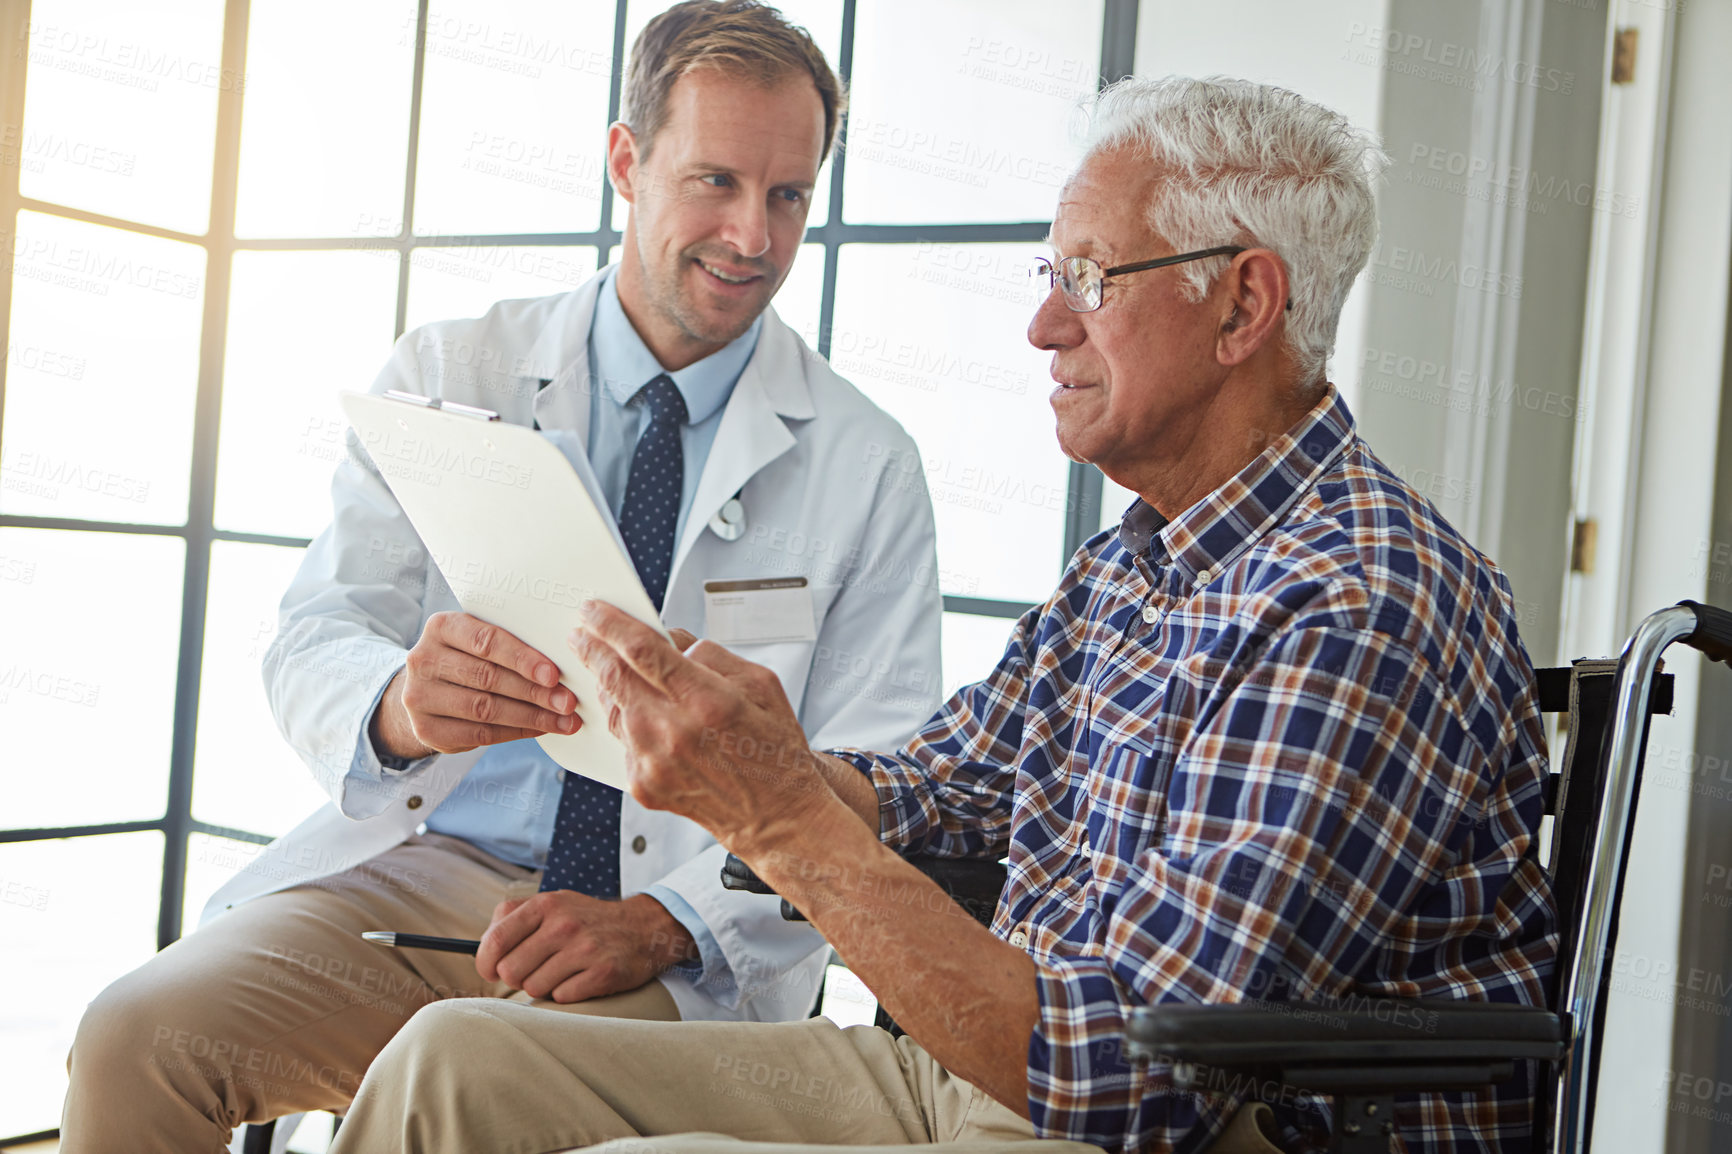 Buy stock photo Cropped shot of a male doctor talking to a senior patient in the retirement home